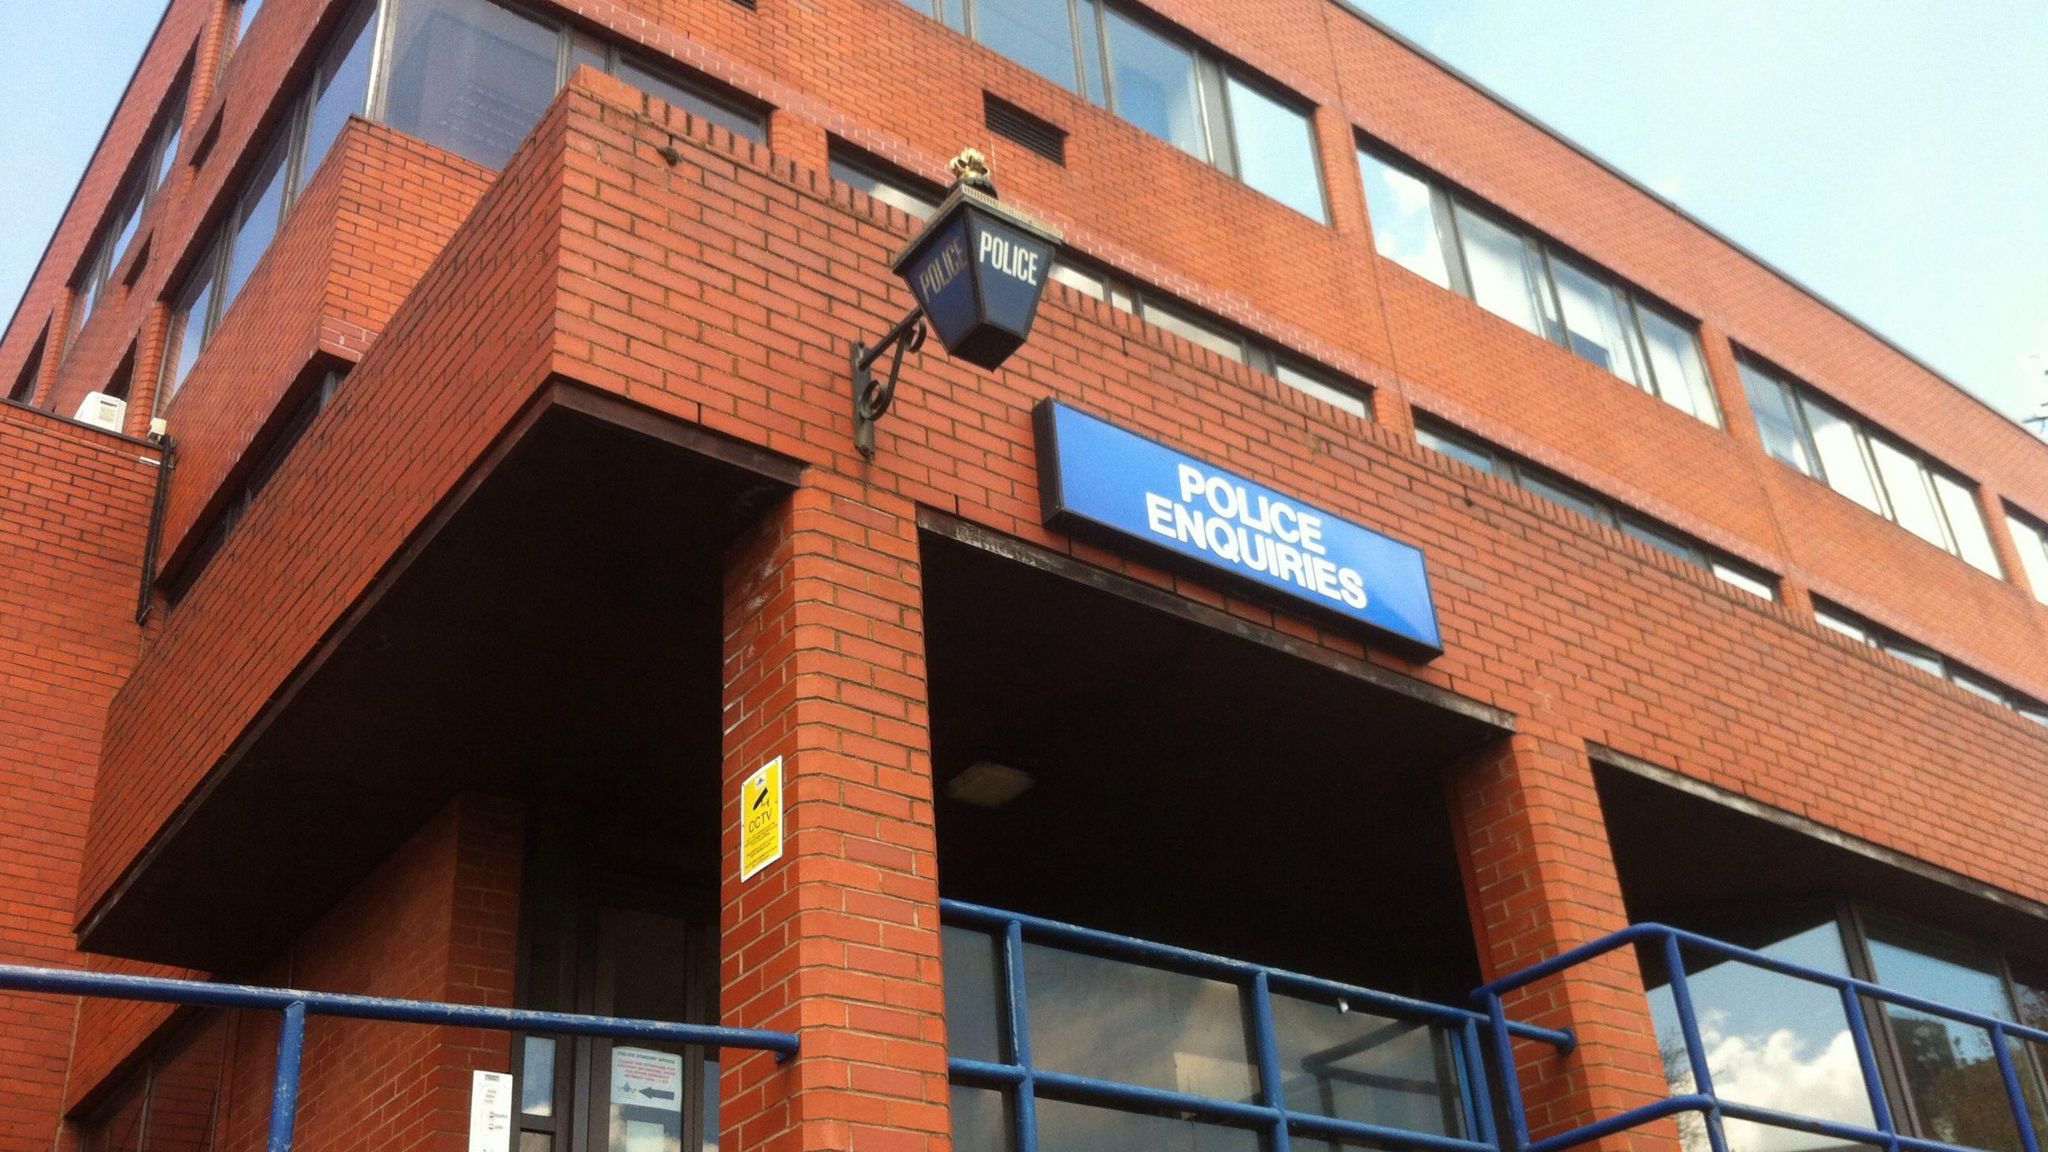 The exterior of Luton police station